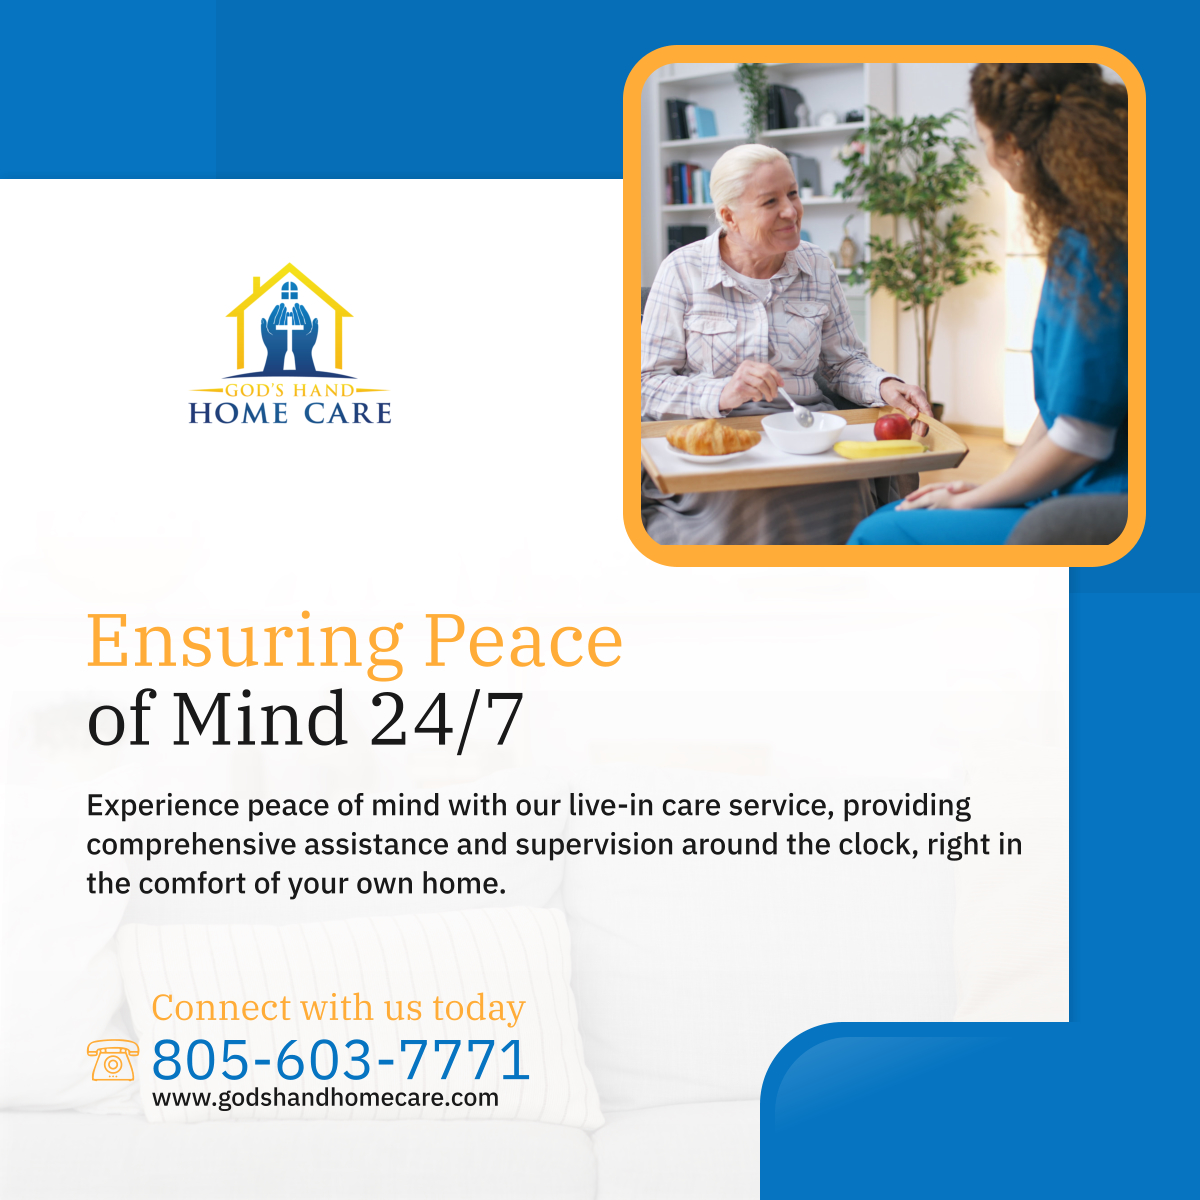 Our live-in care service ensures continuous support and supervision, offering meal preparation, light housekeeping, grooming guidance, and more. Discover the comfort of 24/7 care. 

#OxnardCA #HomeCare #RoundTheClockCare